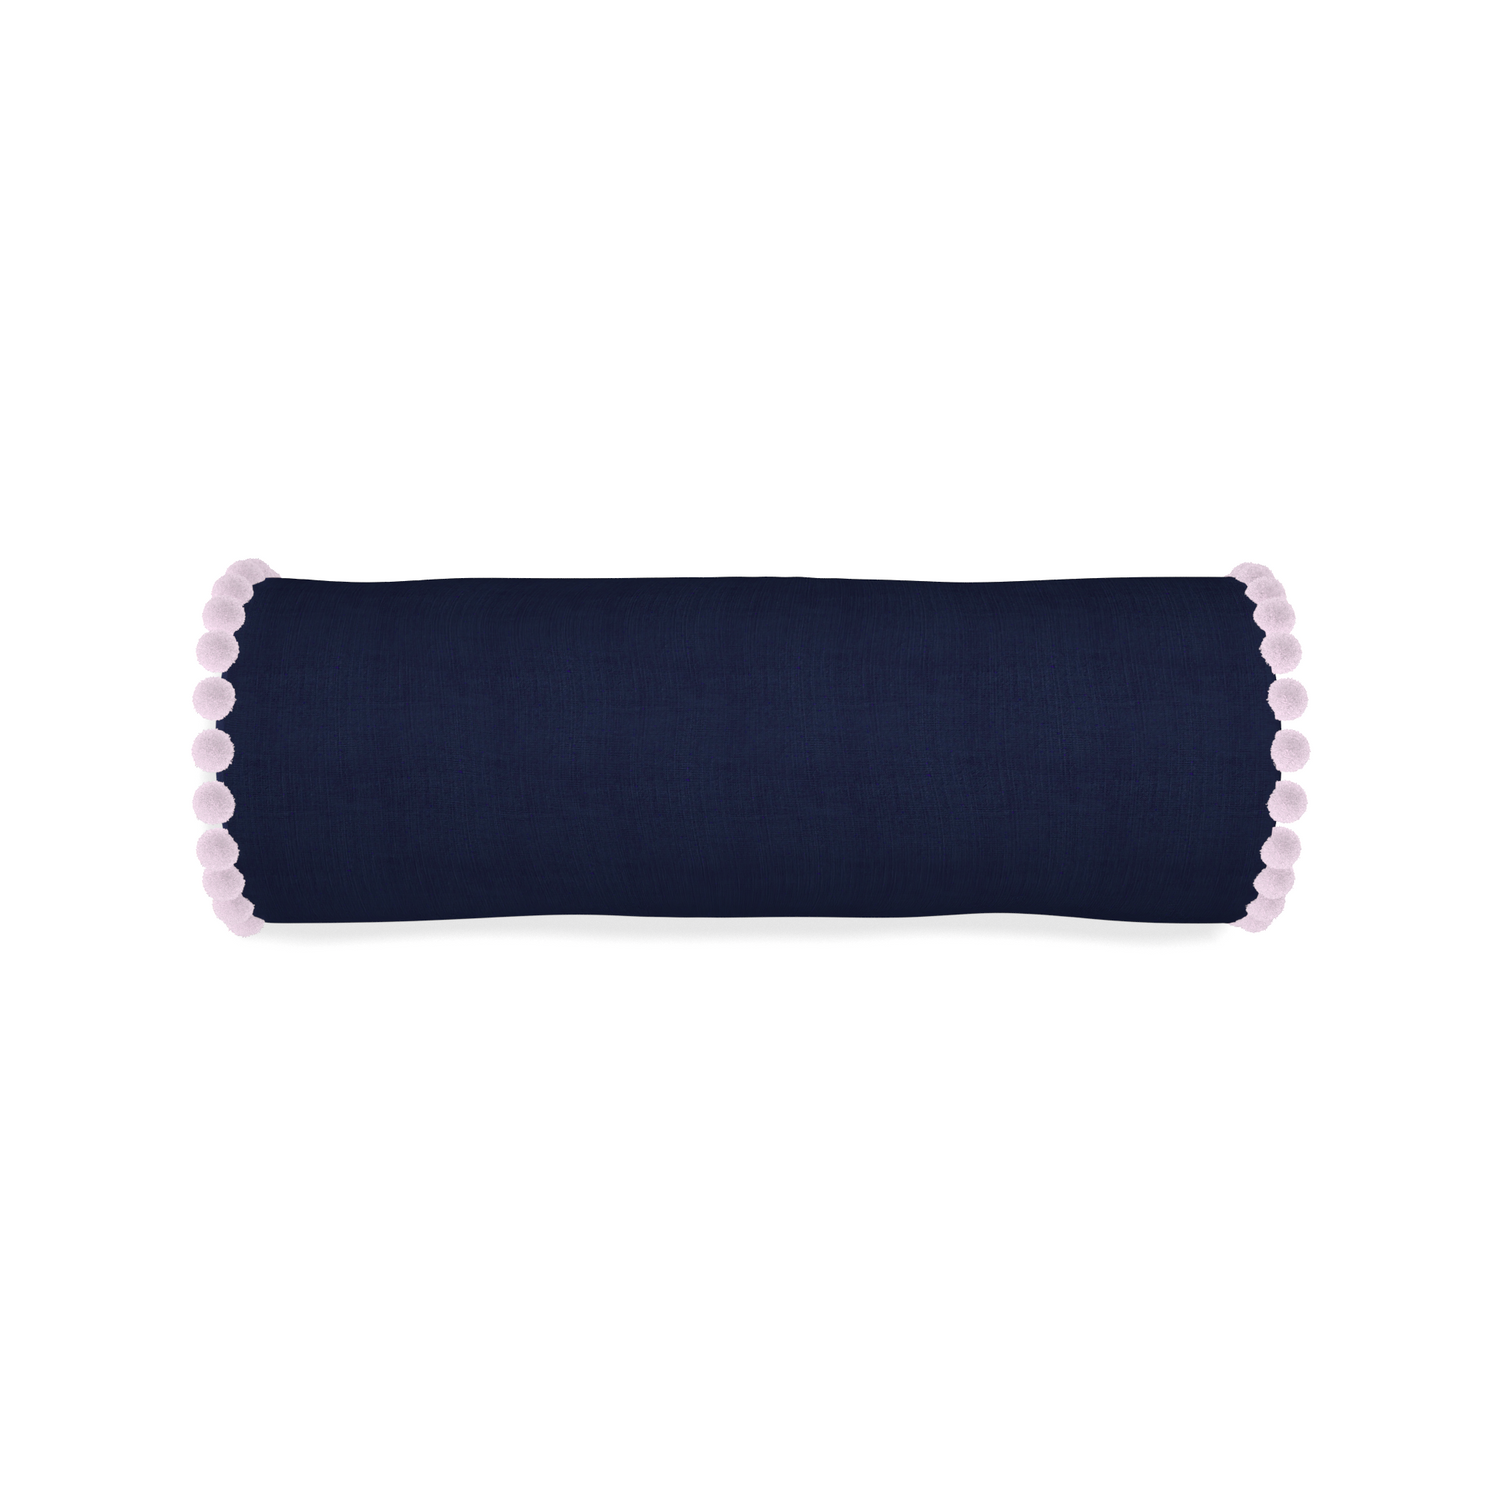 Bolster midnight custom navy bluepillow with l on white background